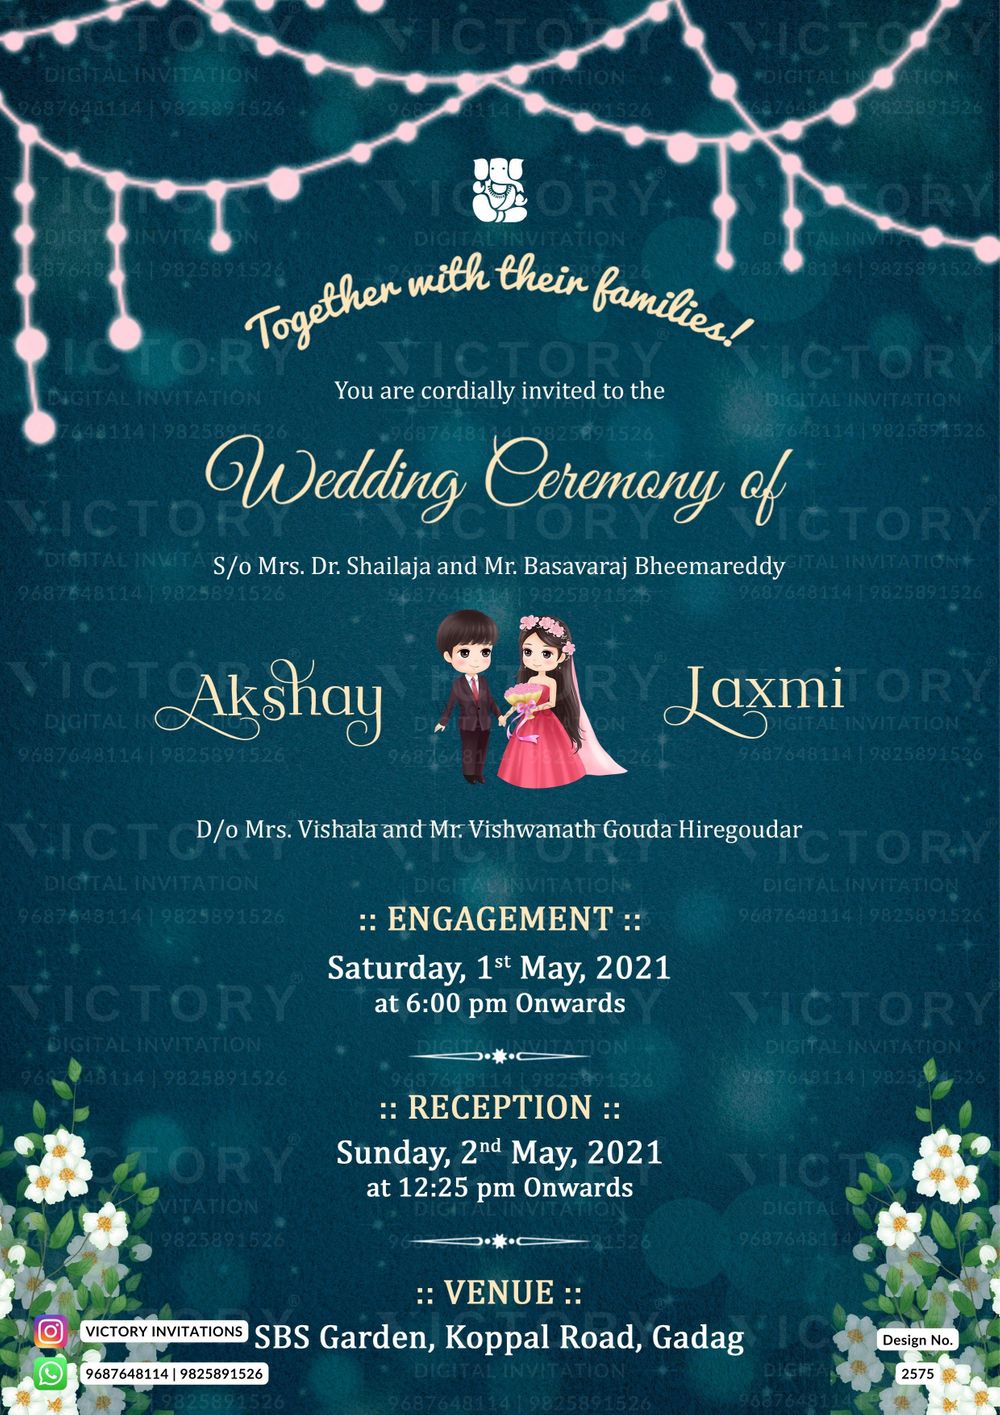 Photo From Wedding - By Victory Invitations